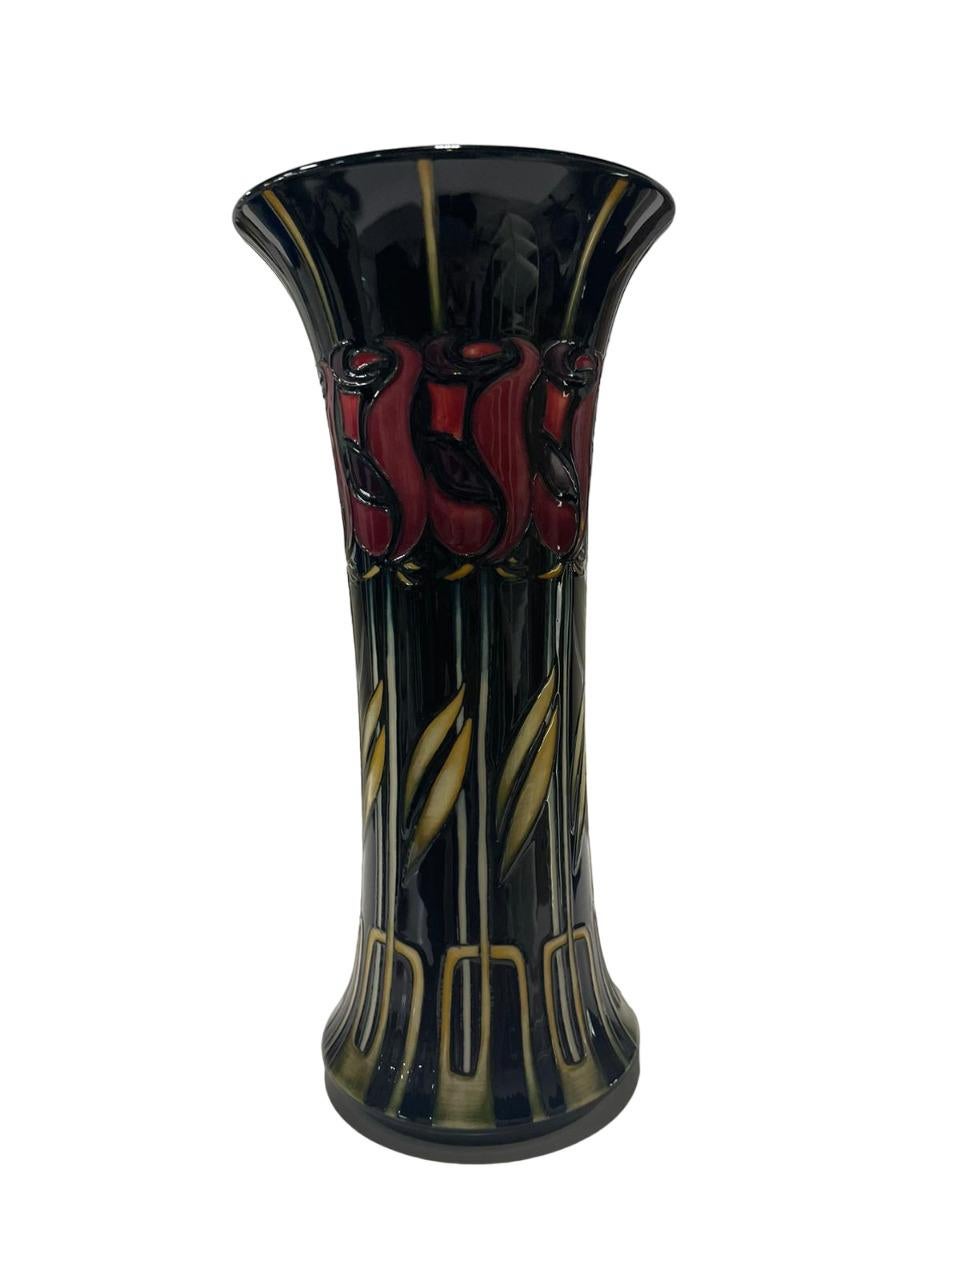 Glazed DISCONTINUED MOORCROFT Night ROSE pattern by Nicola Slaney, dated 2000. Boxed For Sale